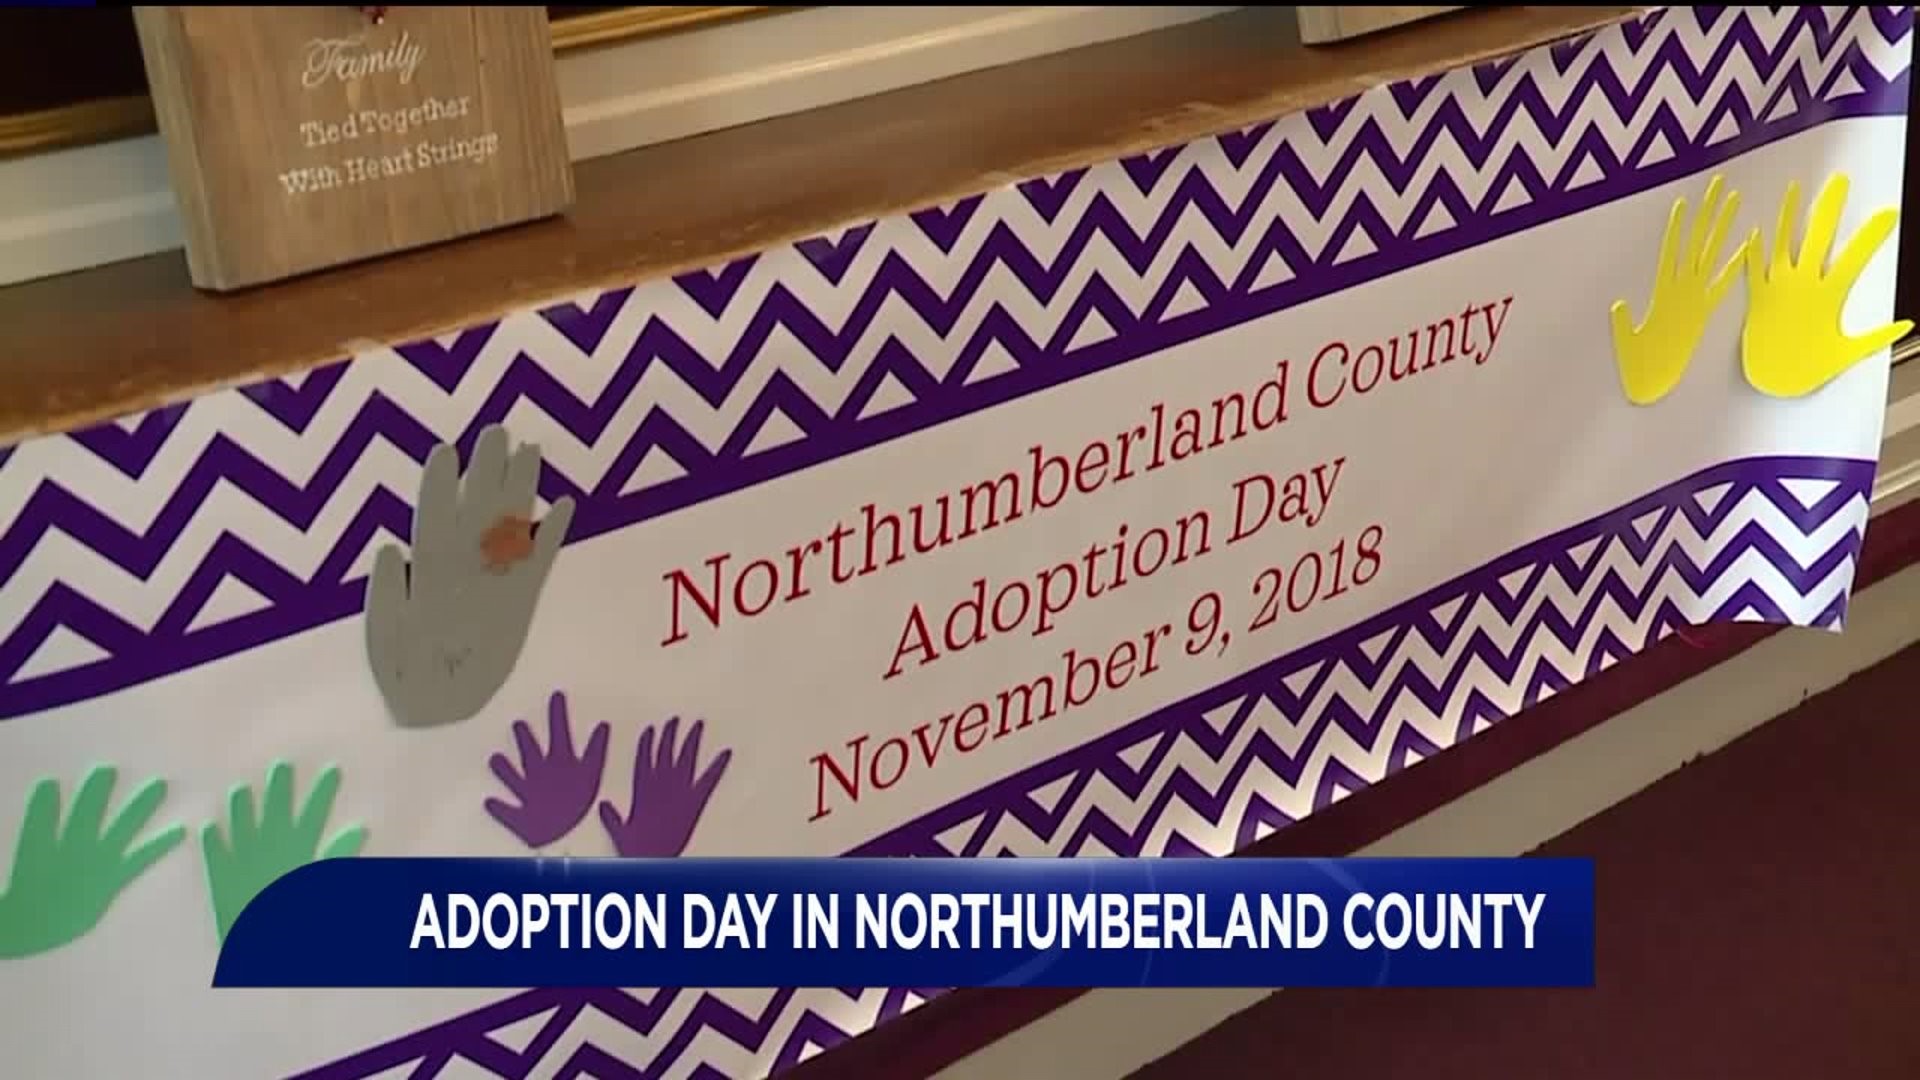 Adoption Day in Northumberland County